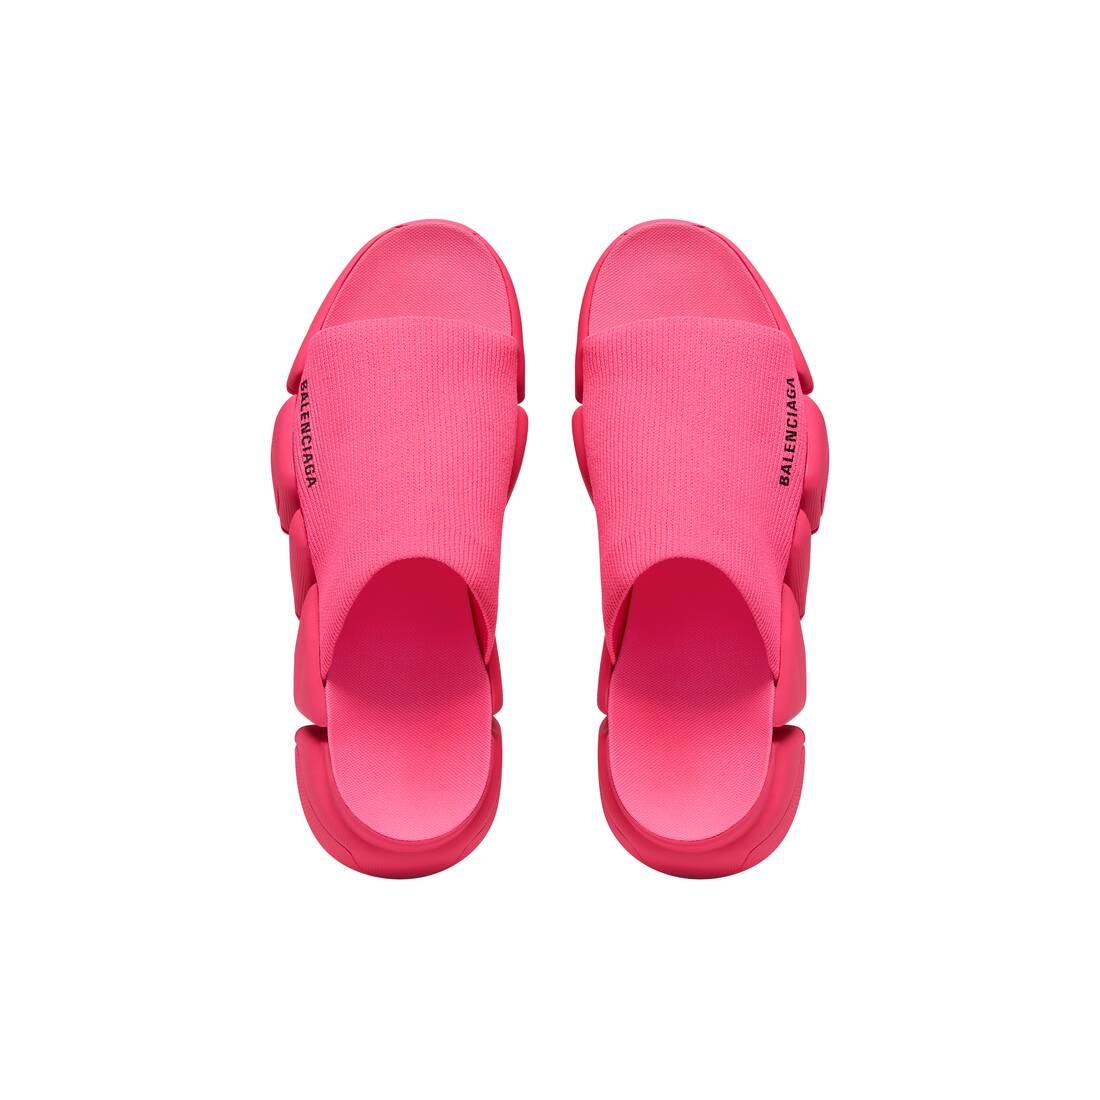 Women's Speed 2.0 Recycled Knit Slide Sandal in Fluo Pink - 5